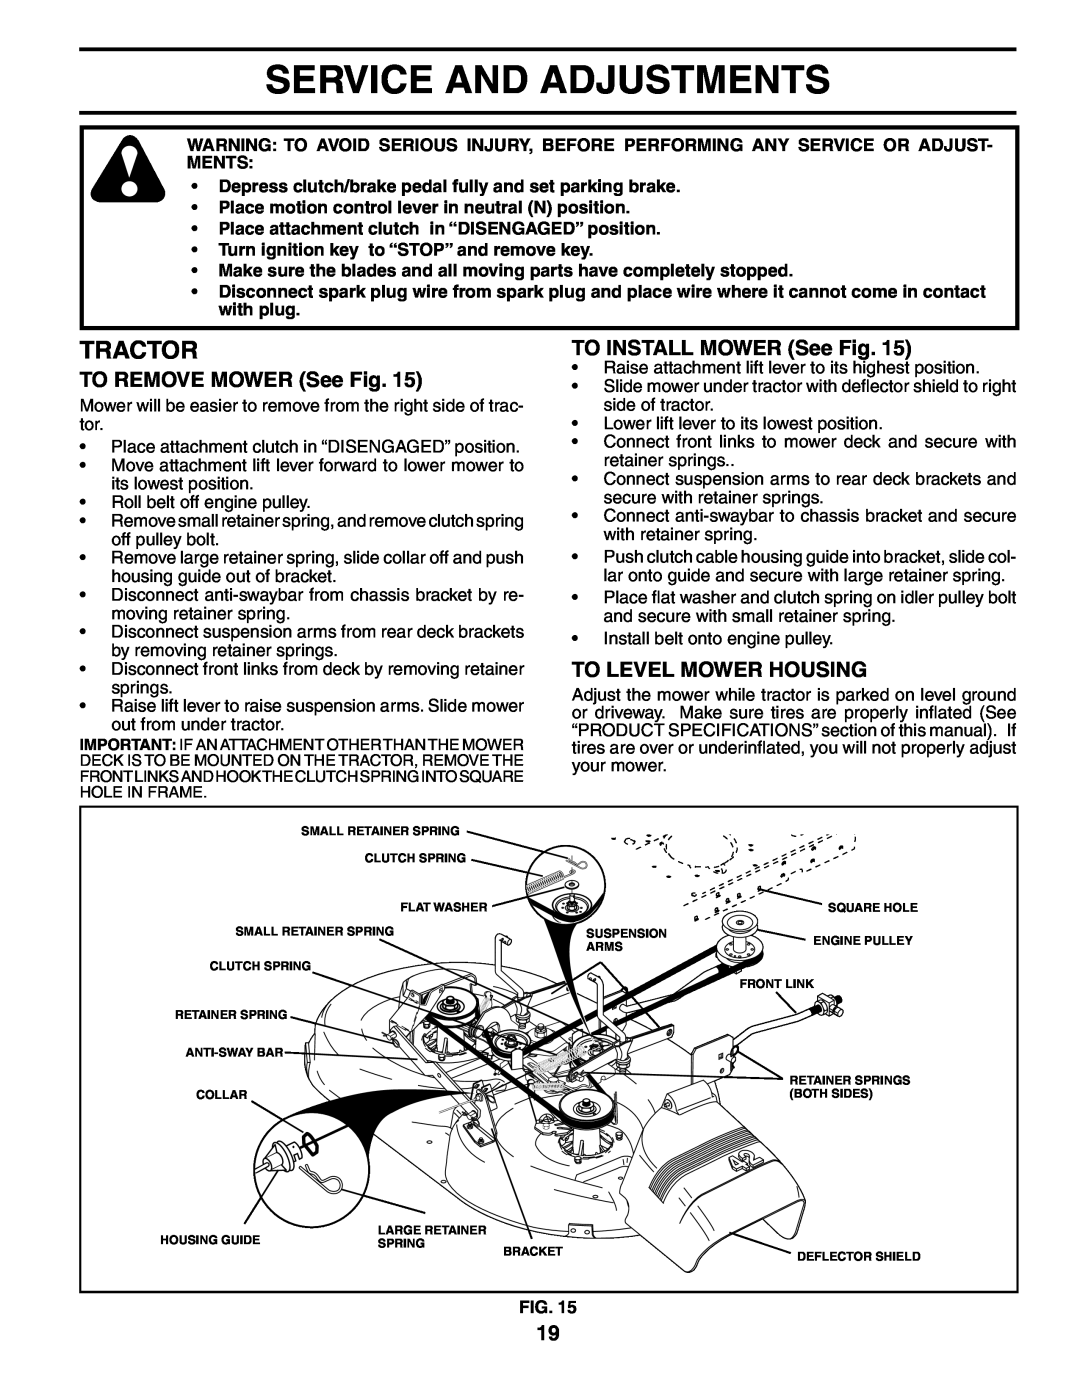 Poulan HDK19H42 manual Service And Adjustments, TO REMOVE MOWER See Fig, TO INSTALL MOWER See Fig, To Level Mower Housing 